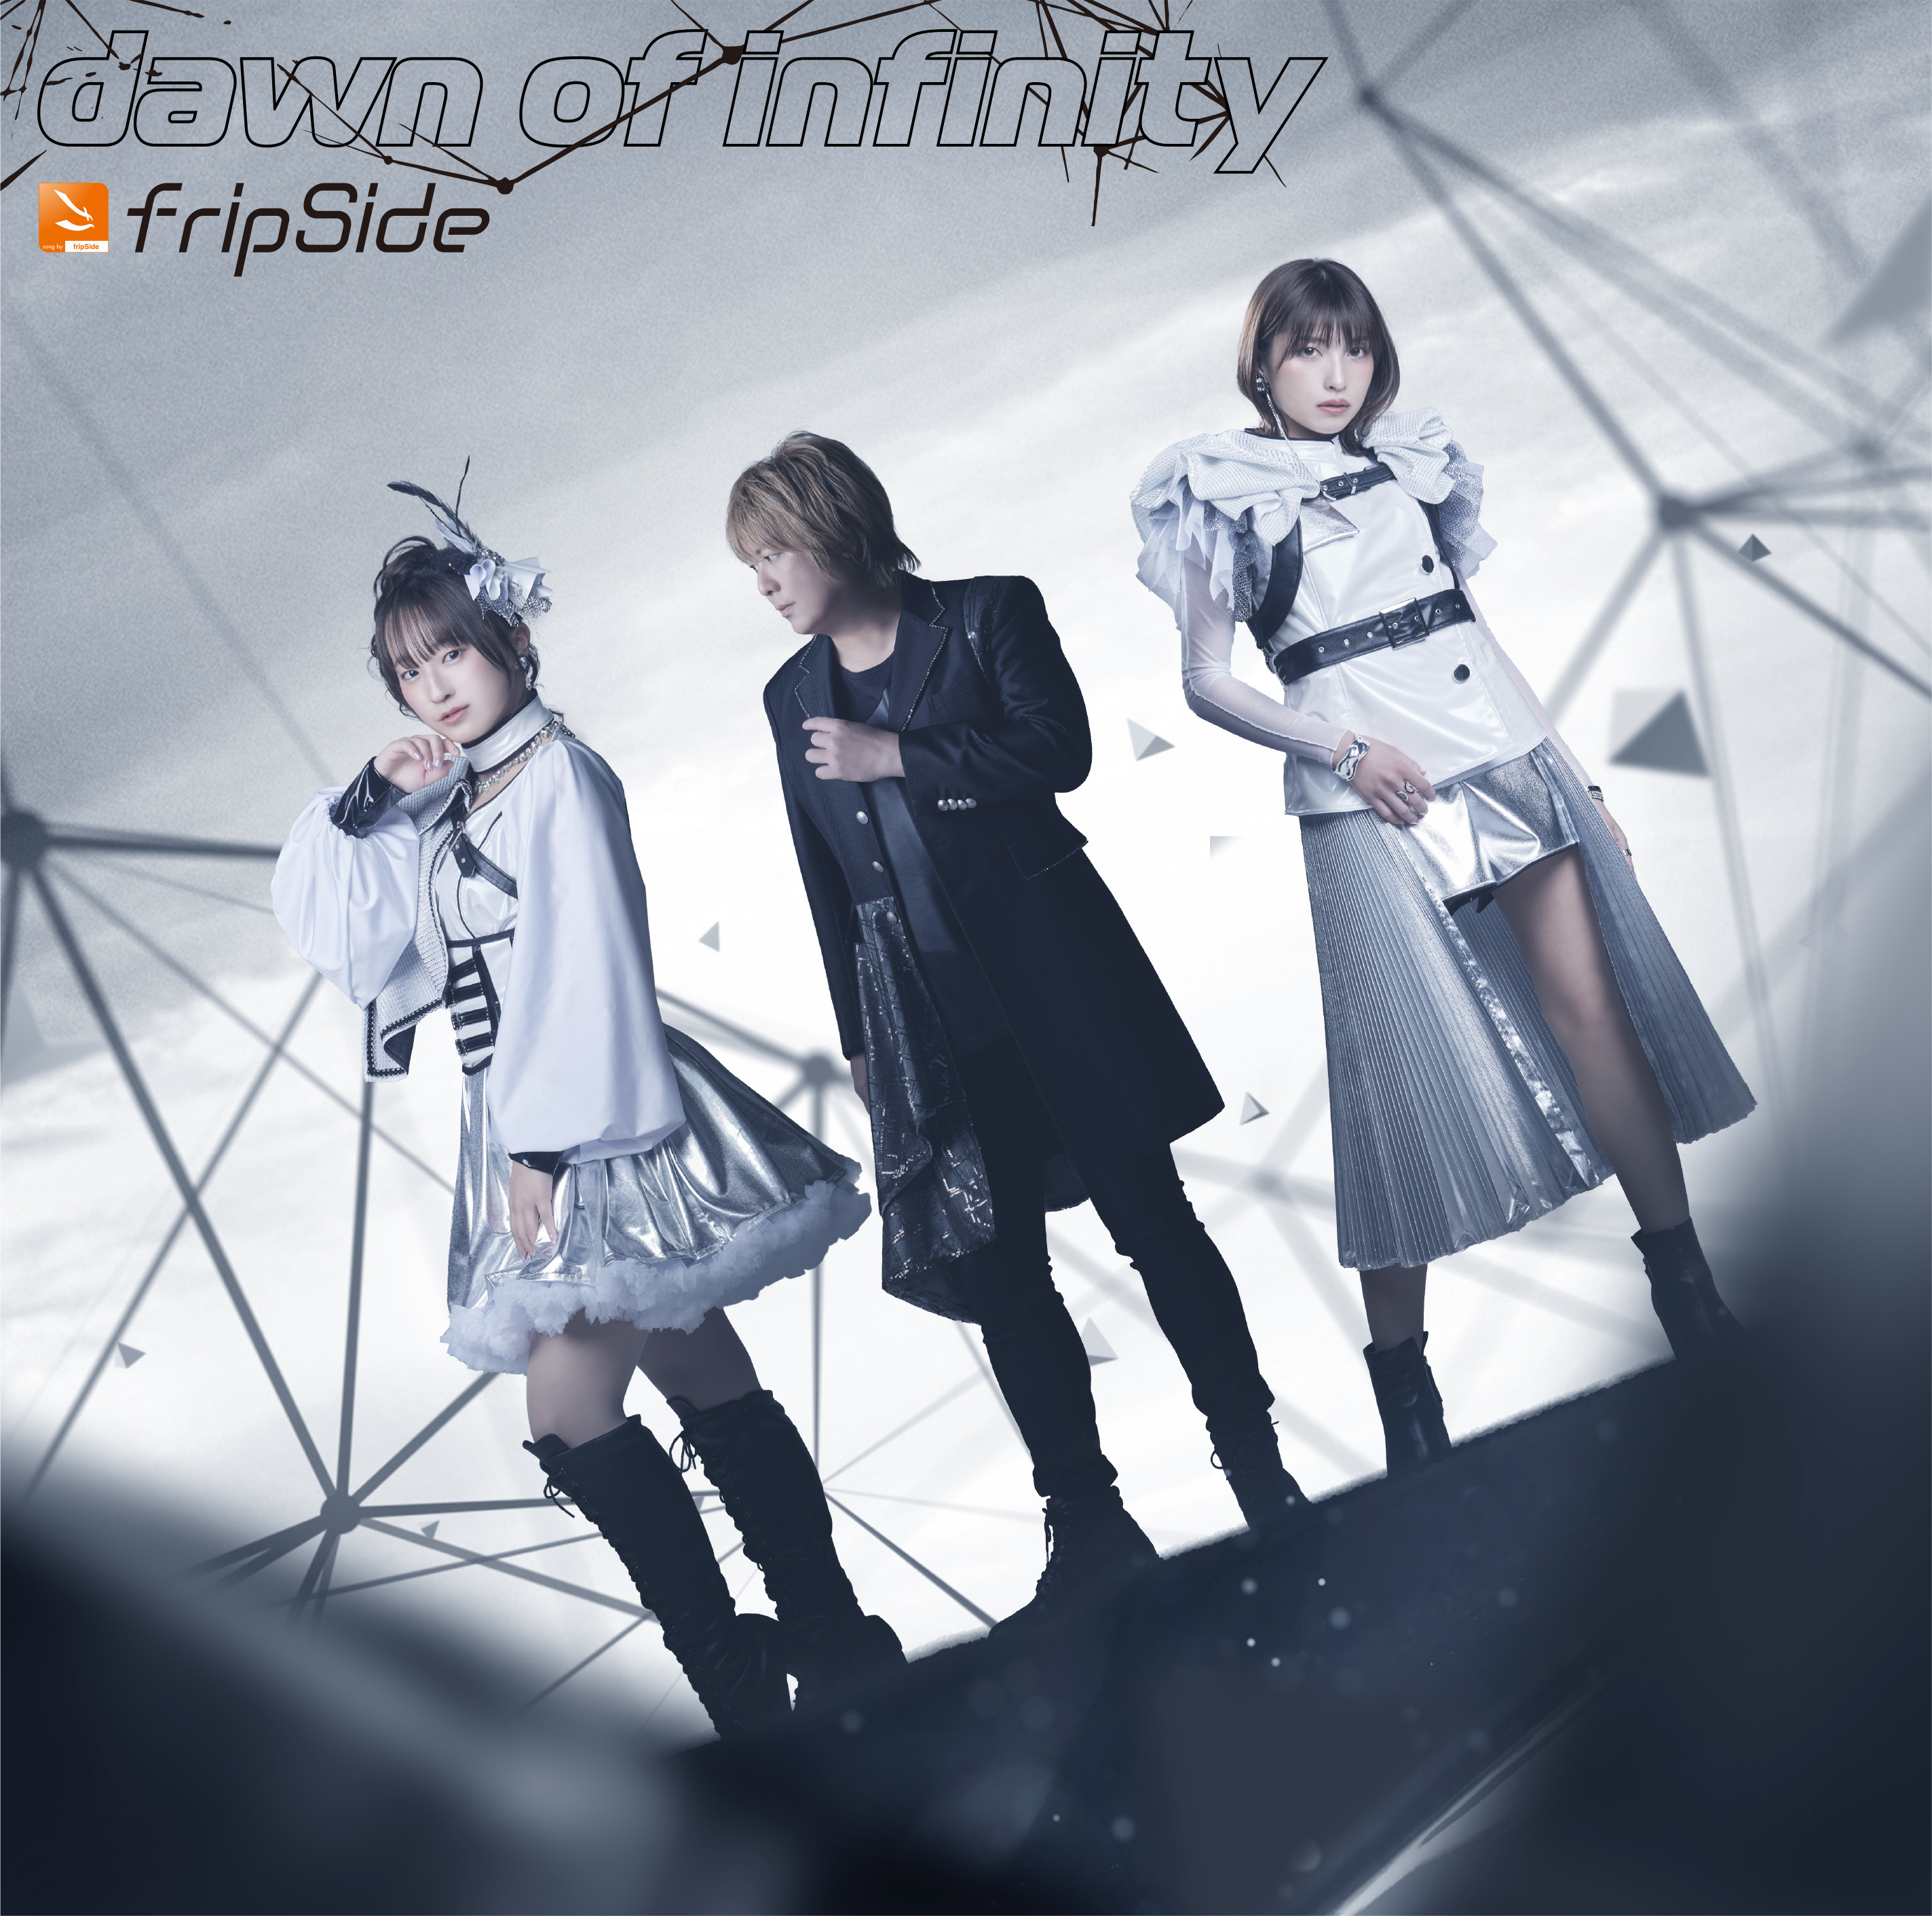 dawn of infinity | fripSide OFFICIAL SITE